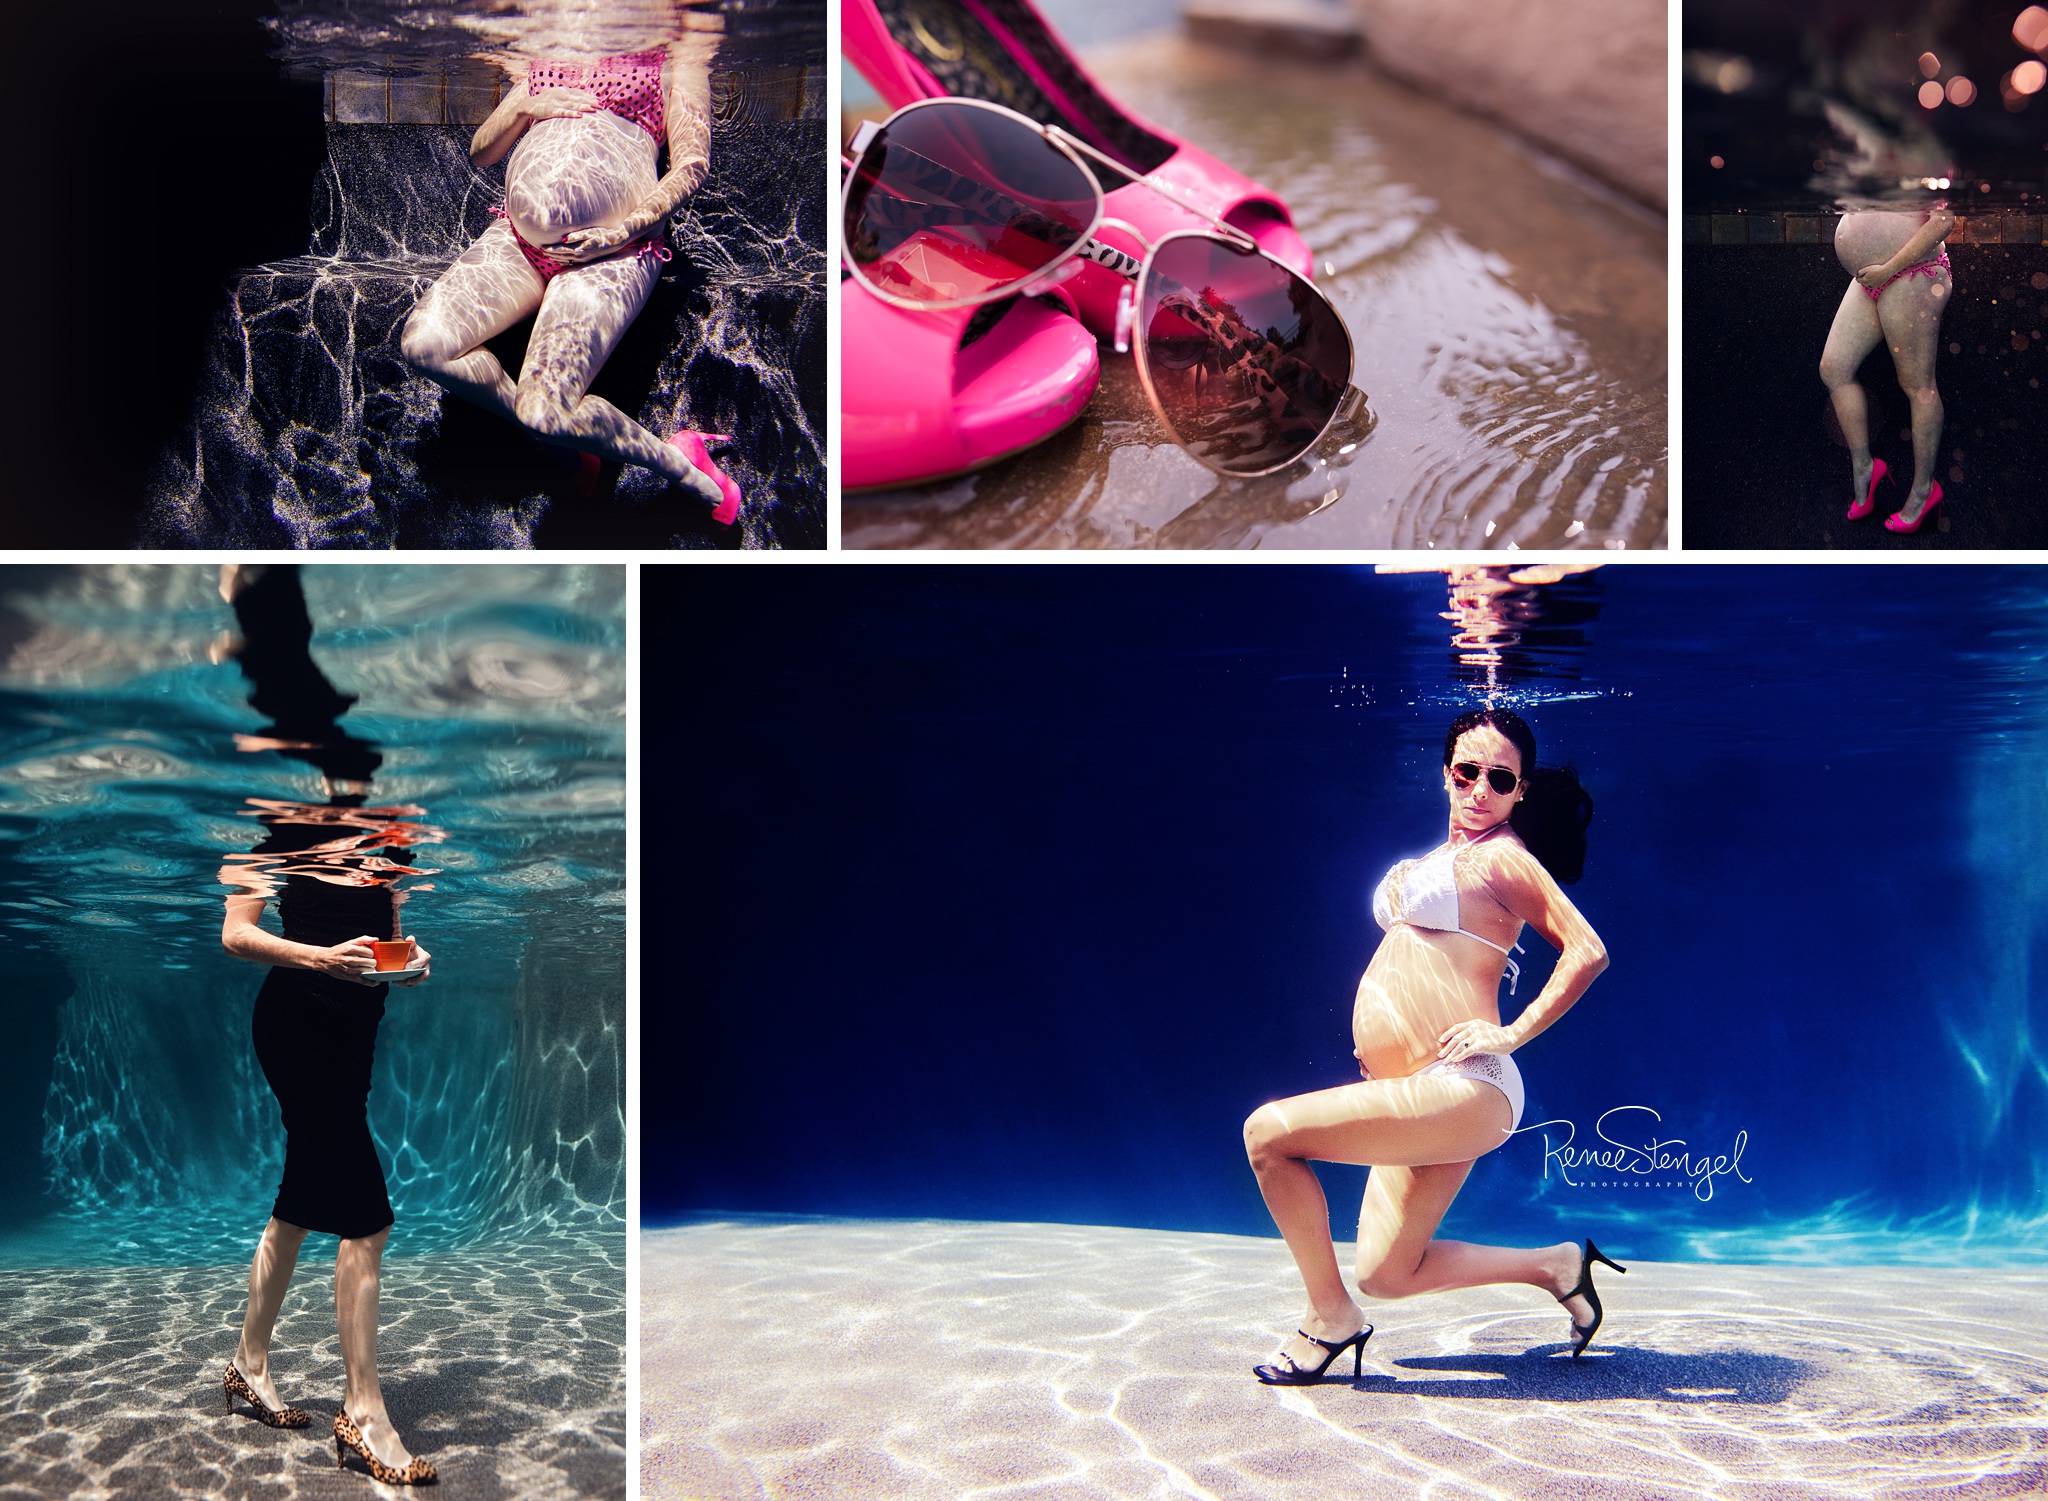 Use of High Heel Shoes in Underwater Photography